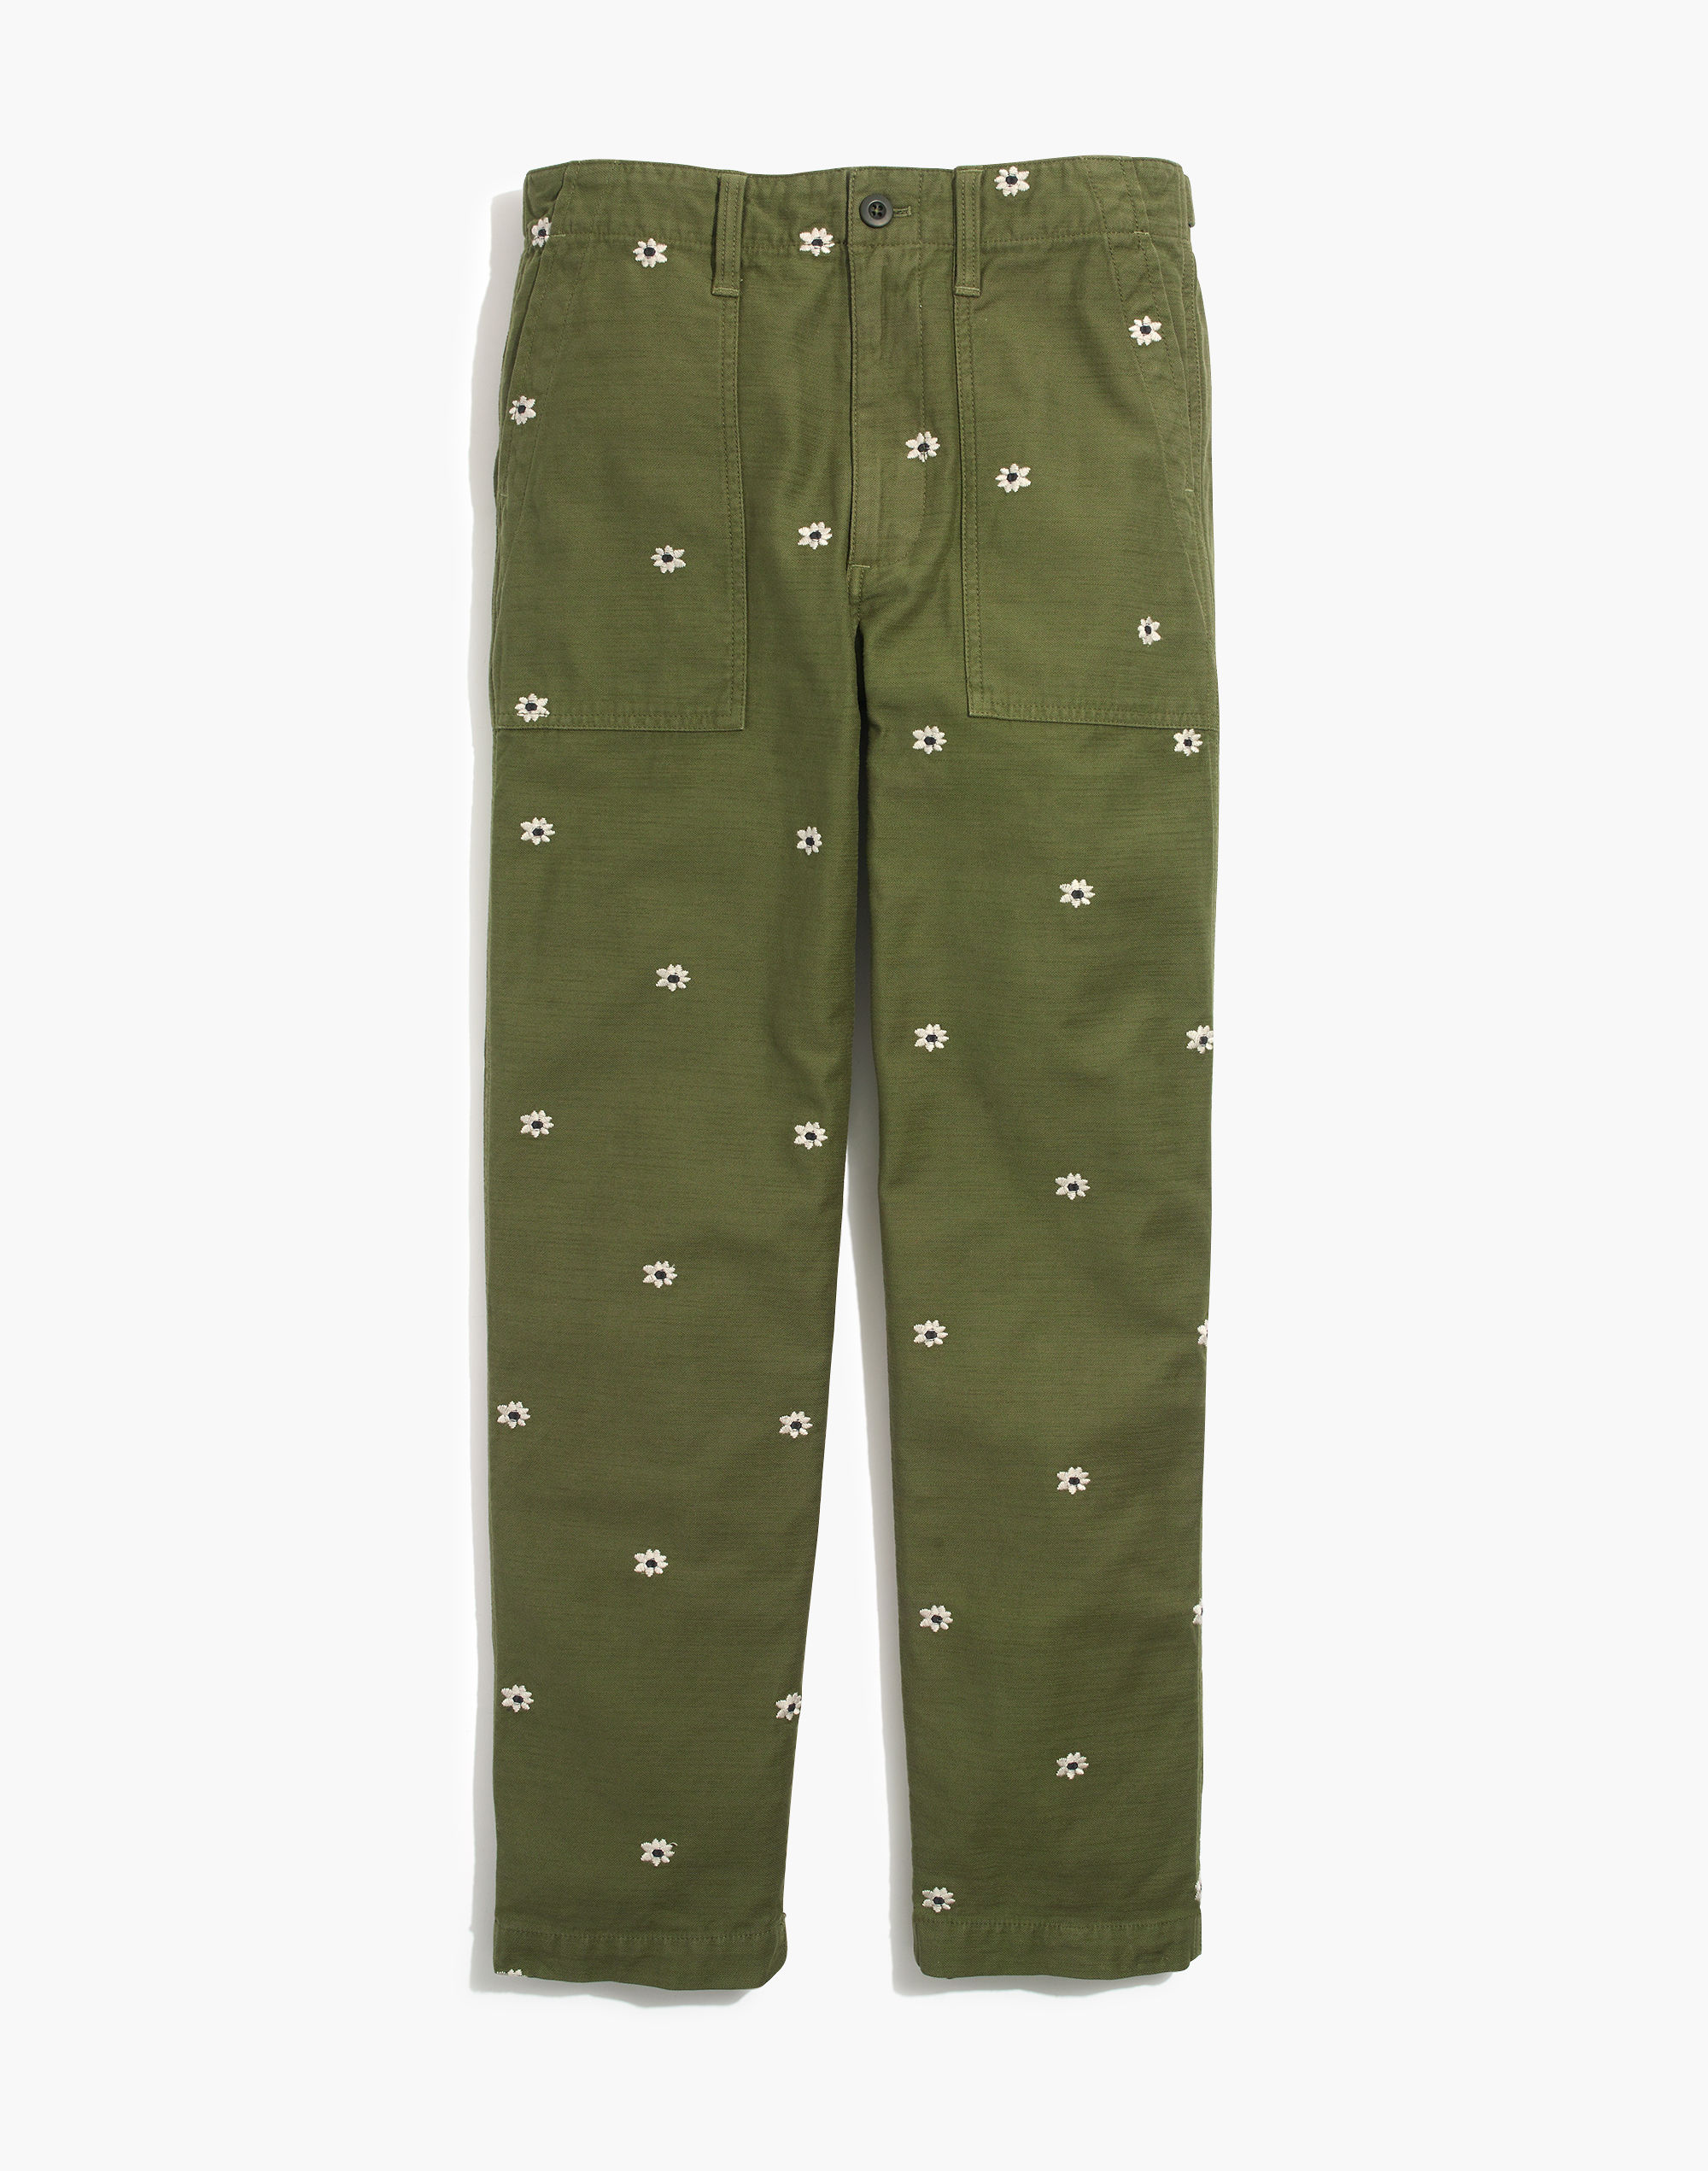 Madewell Women's Curvy Griff Tapered Fatigue Pants Olive Green Size 33